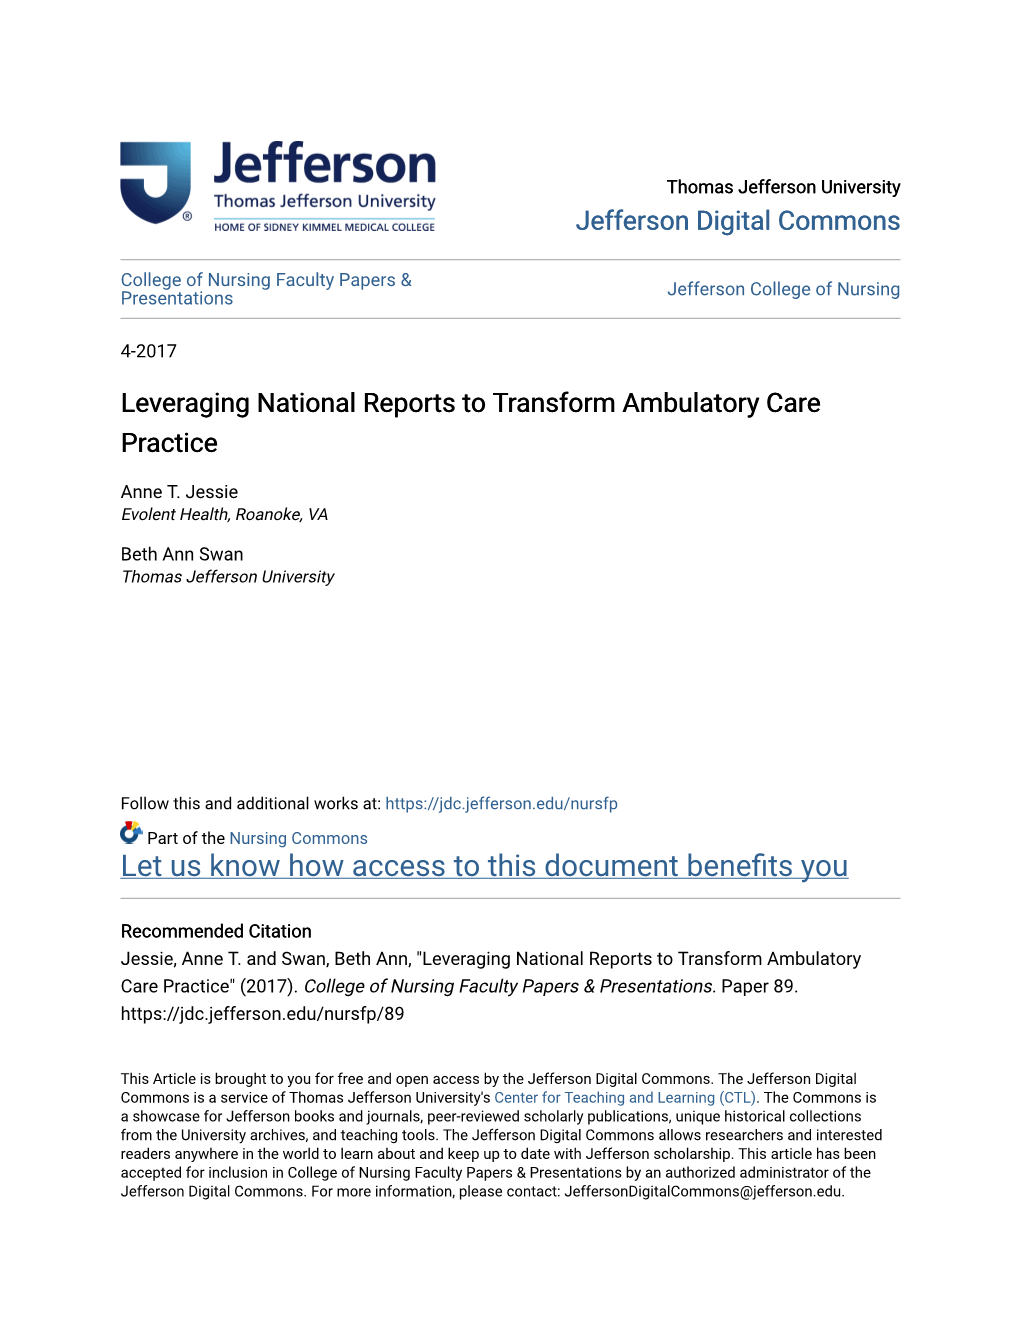 Leveraging National Reports to Transform Ambulatory Care Practice